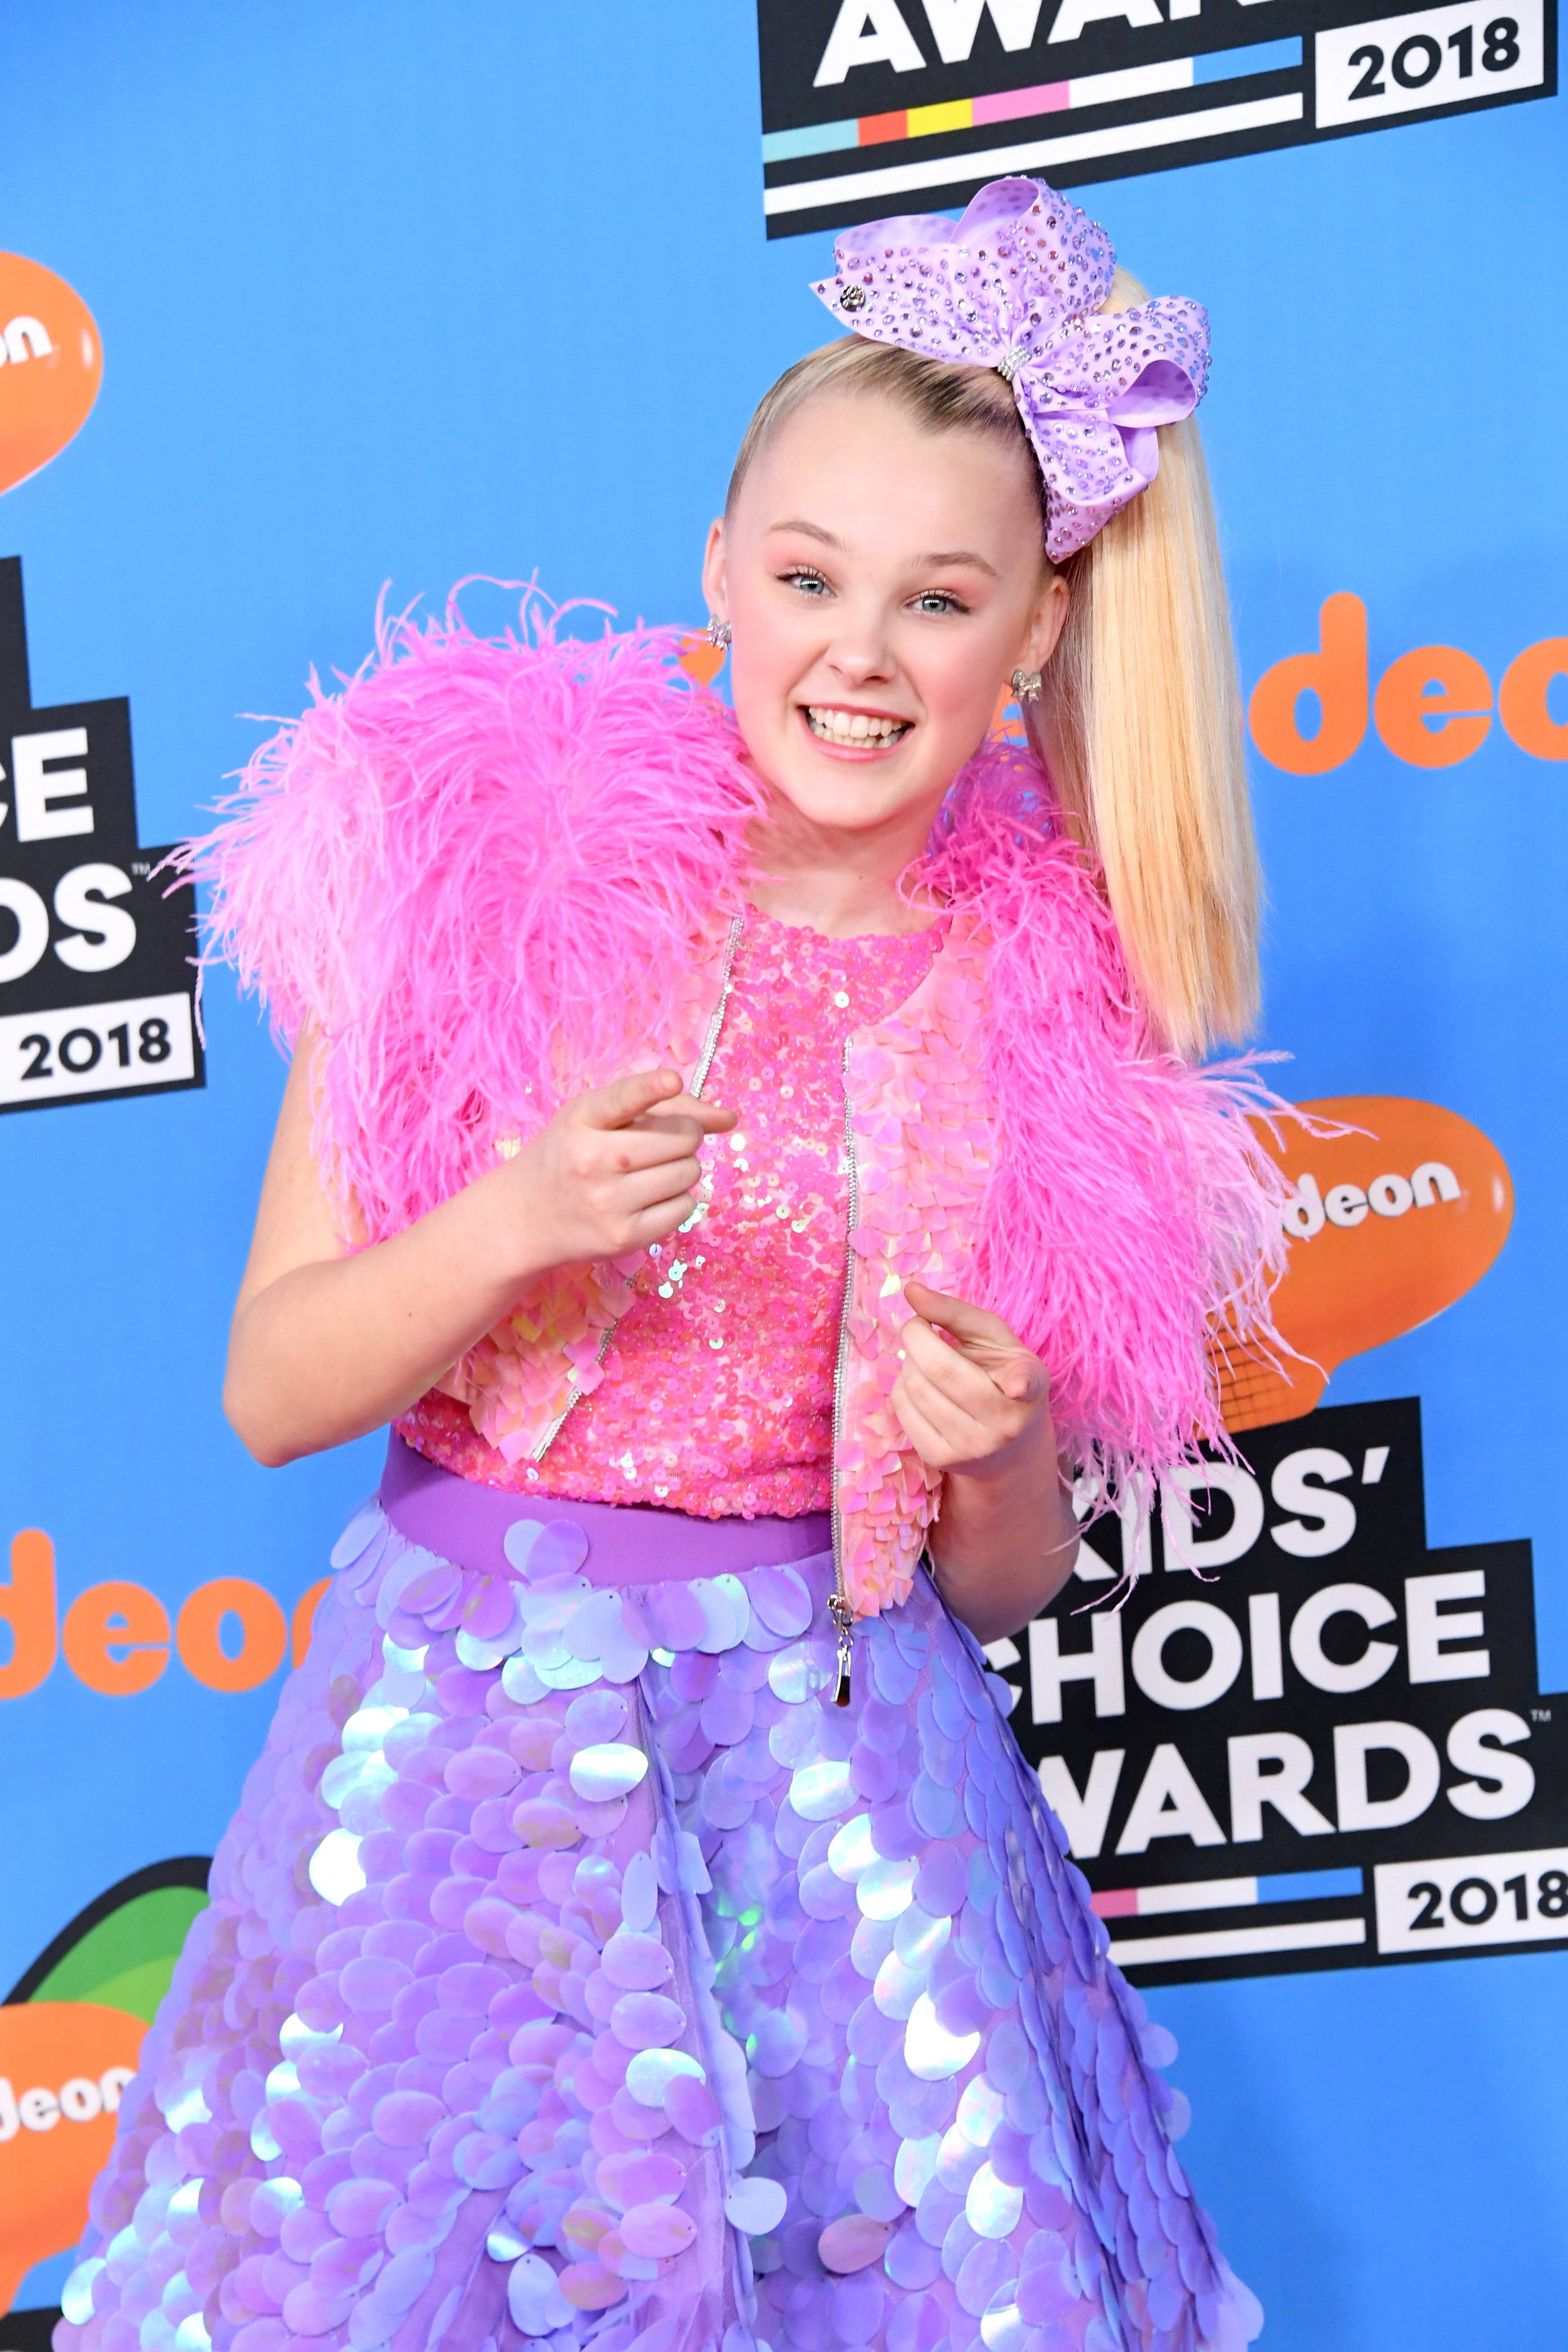 JoJo Siwa attends Nickelodeon's 2018 Kids' Choice Awards at The Forum on March 24, 2018 in Inglewood, California.